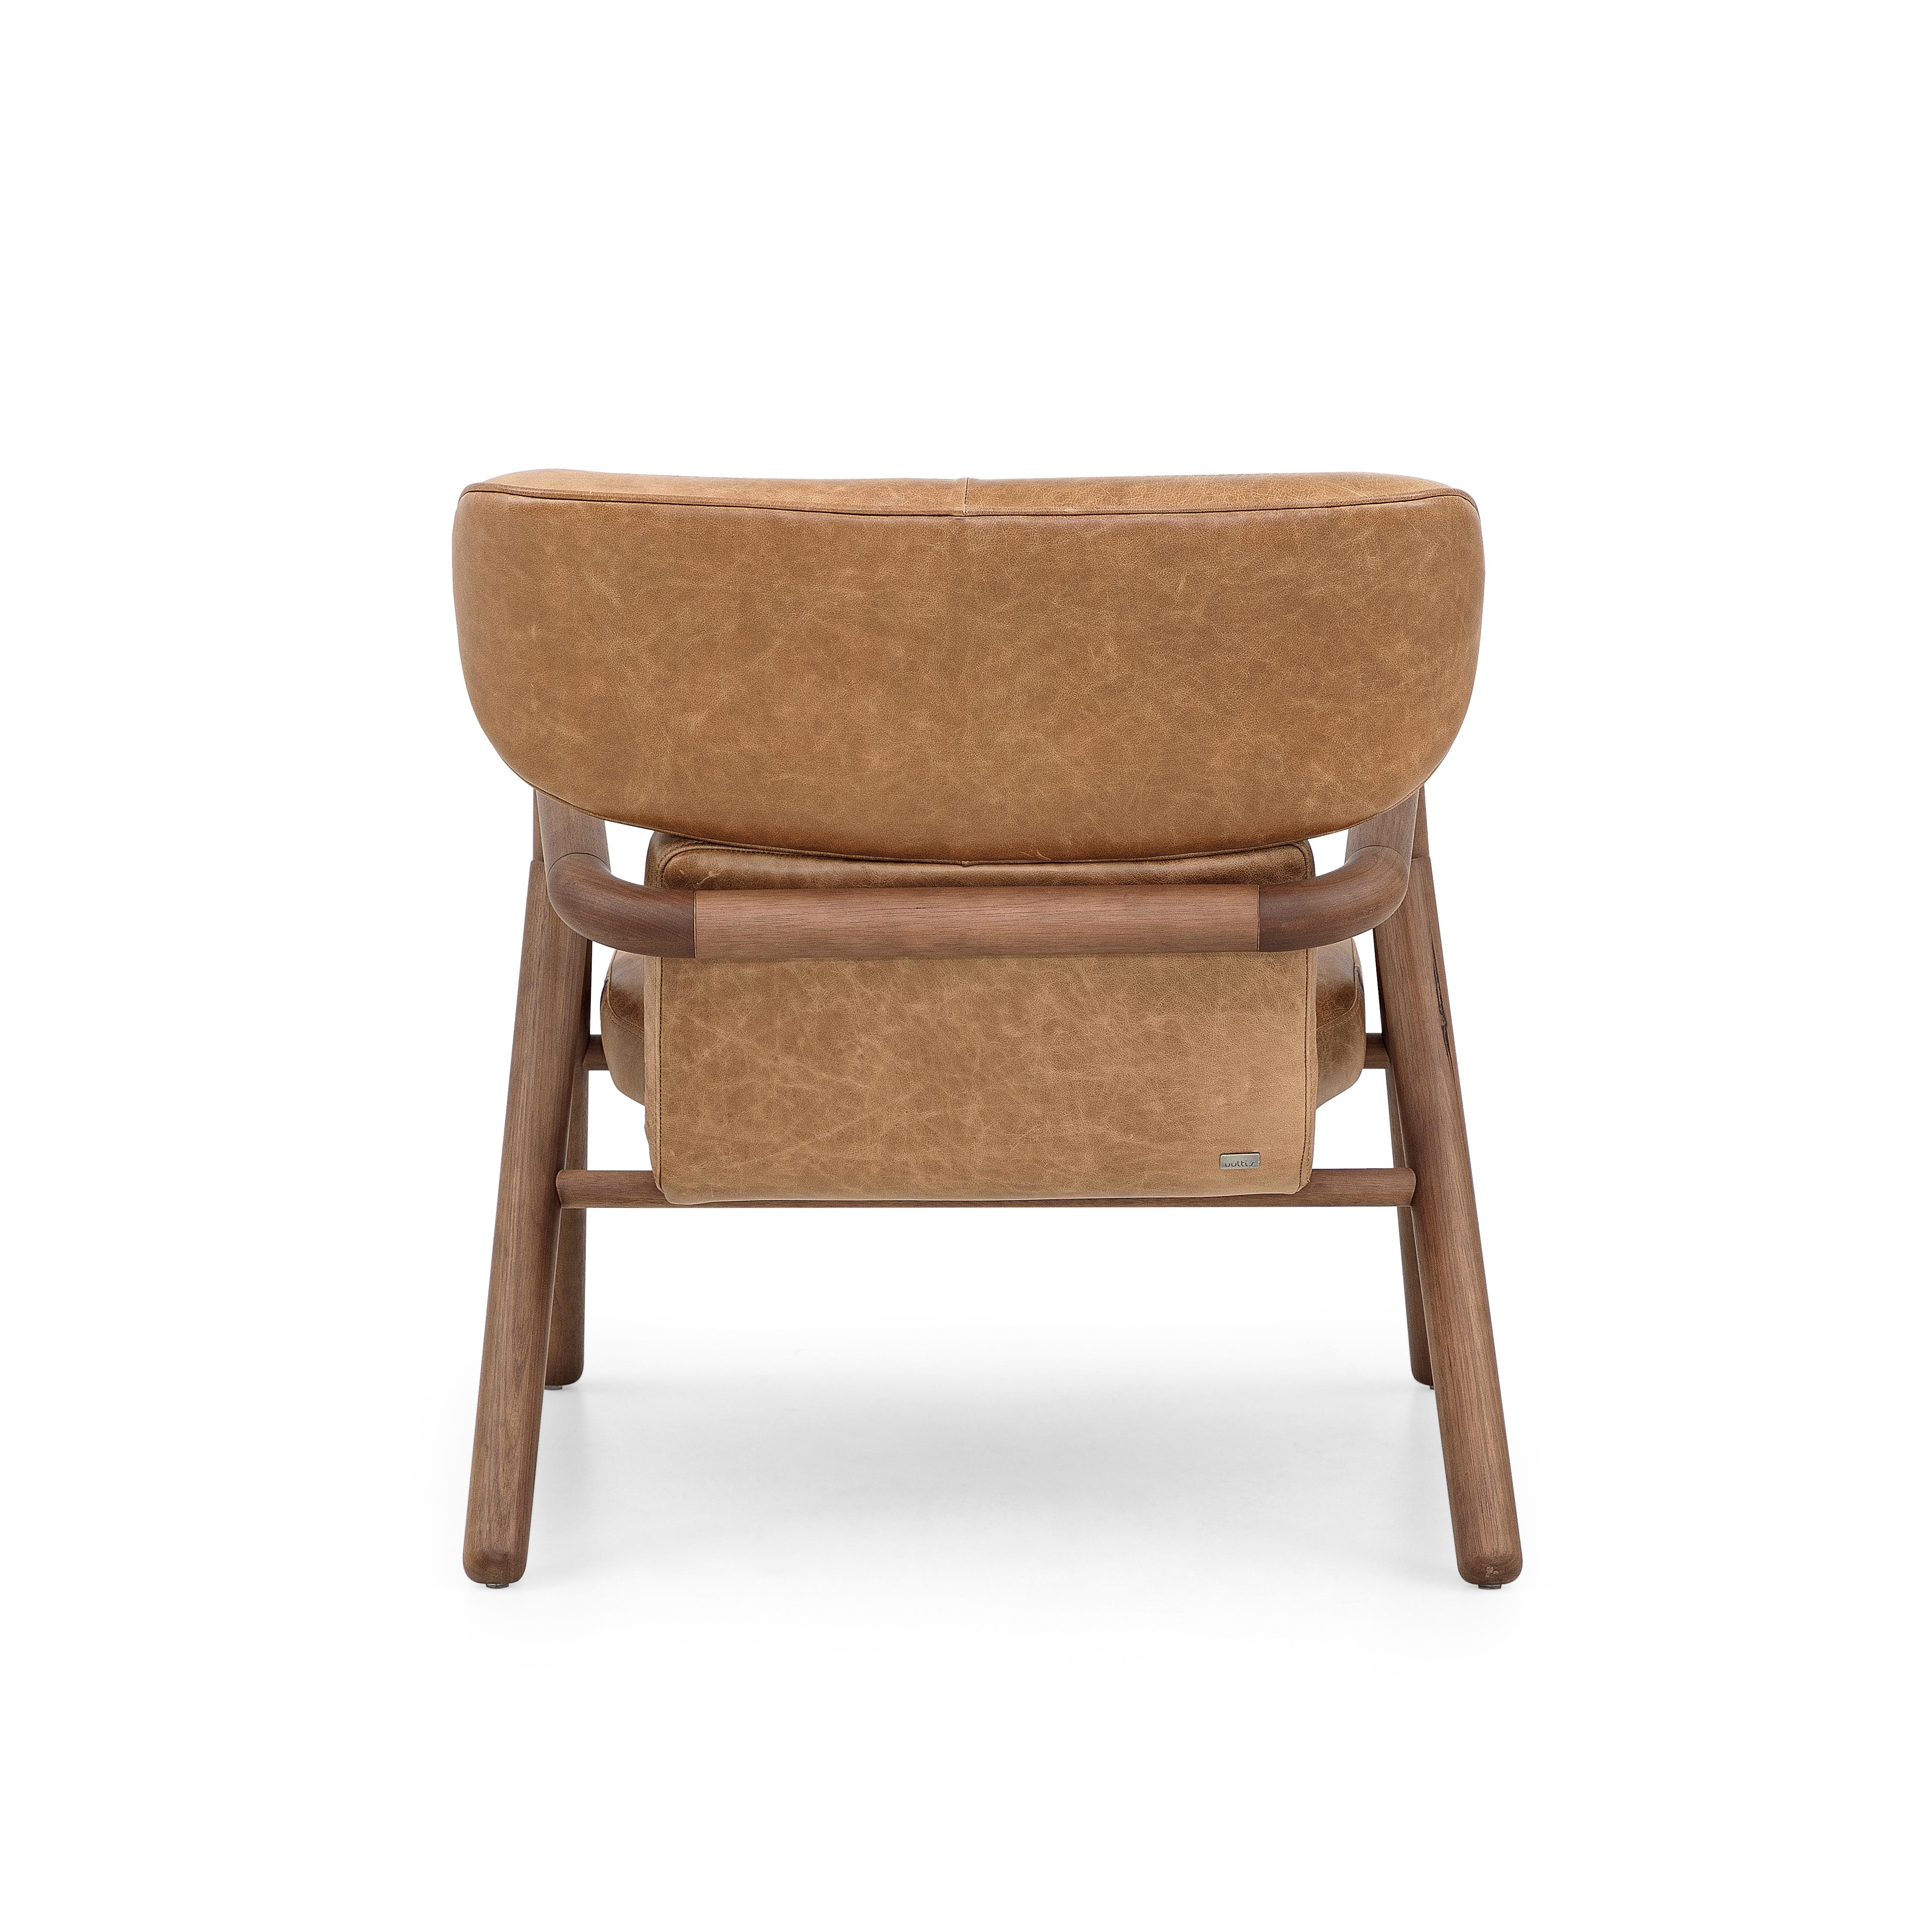 Contemporary Sole Scandinavian-Styled Armchair in Walnut Wood Finish and Brown Leather For Sale